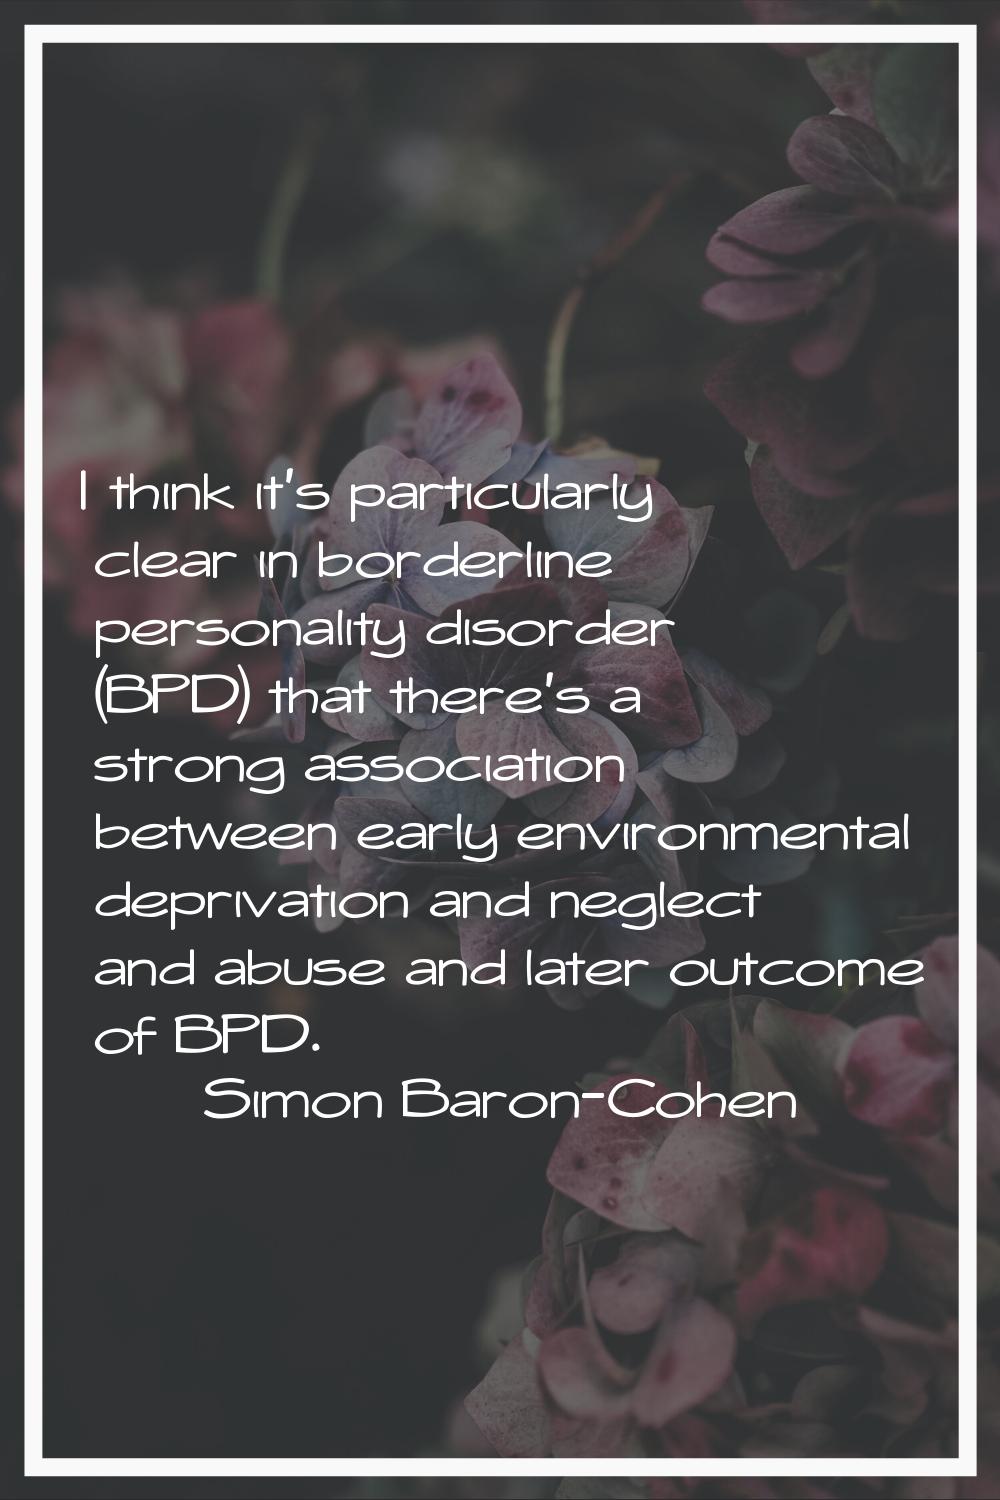 I think it's particularly clear in borderline personality disorder (BPD) that there's a strong asso